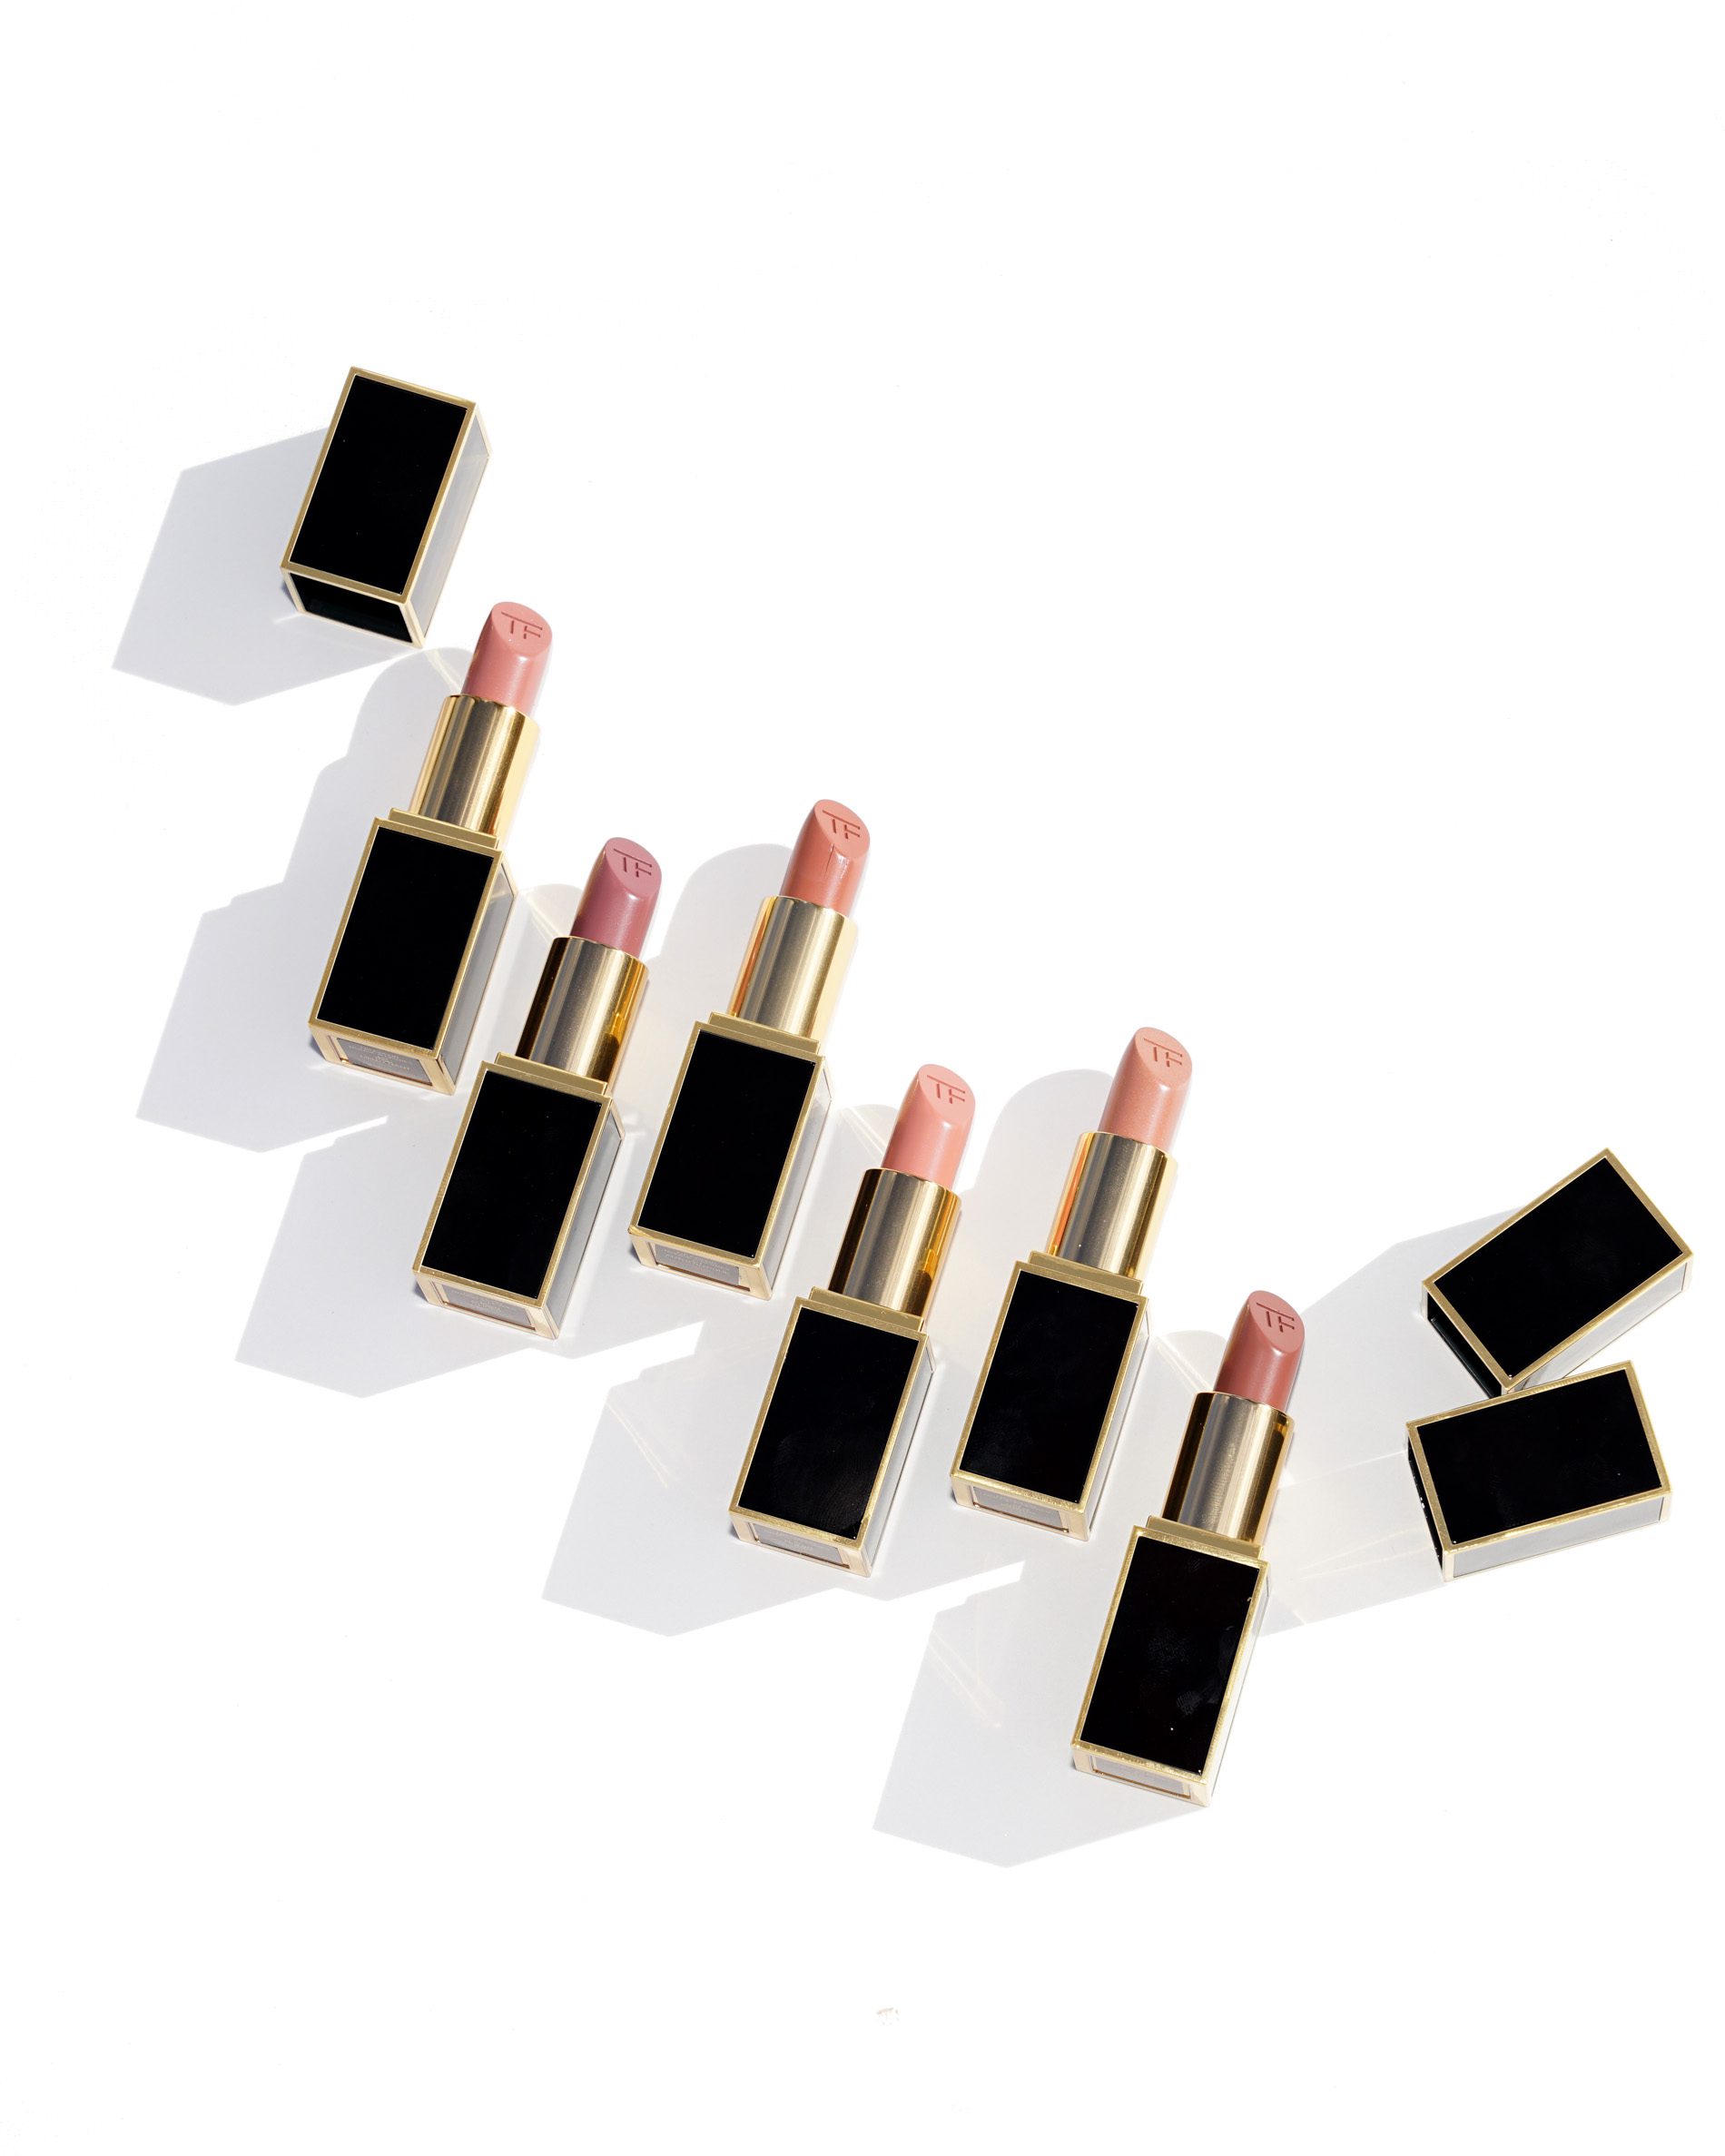 Tom Ford Lip Color New Shades: Bad Lieutenant, Sugar Glider, Autoerotique,  Spiced Honey, Open Kimono and Devore - The Beauty Look Book